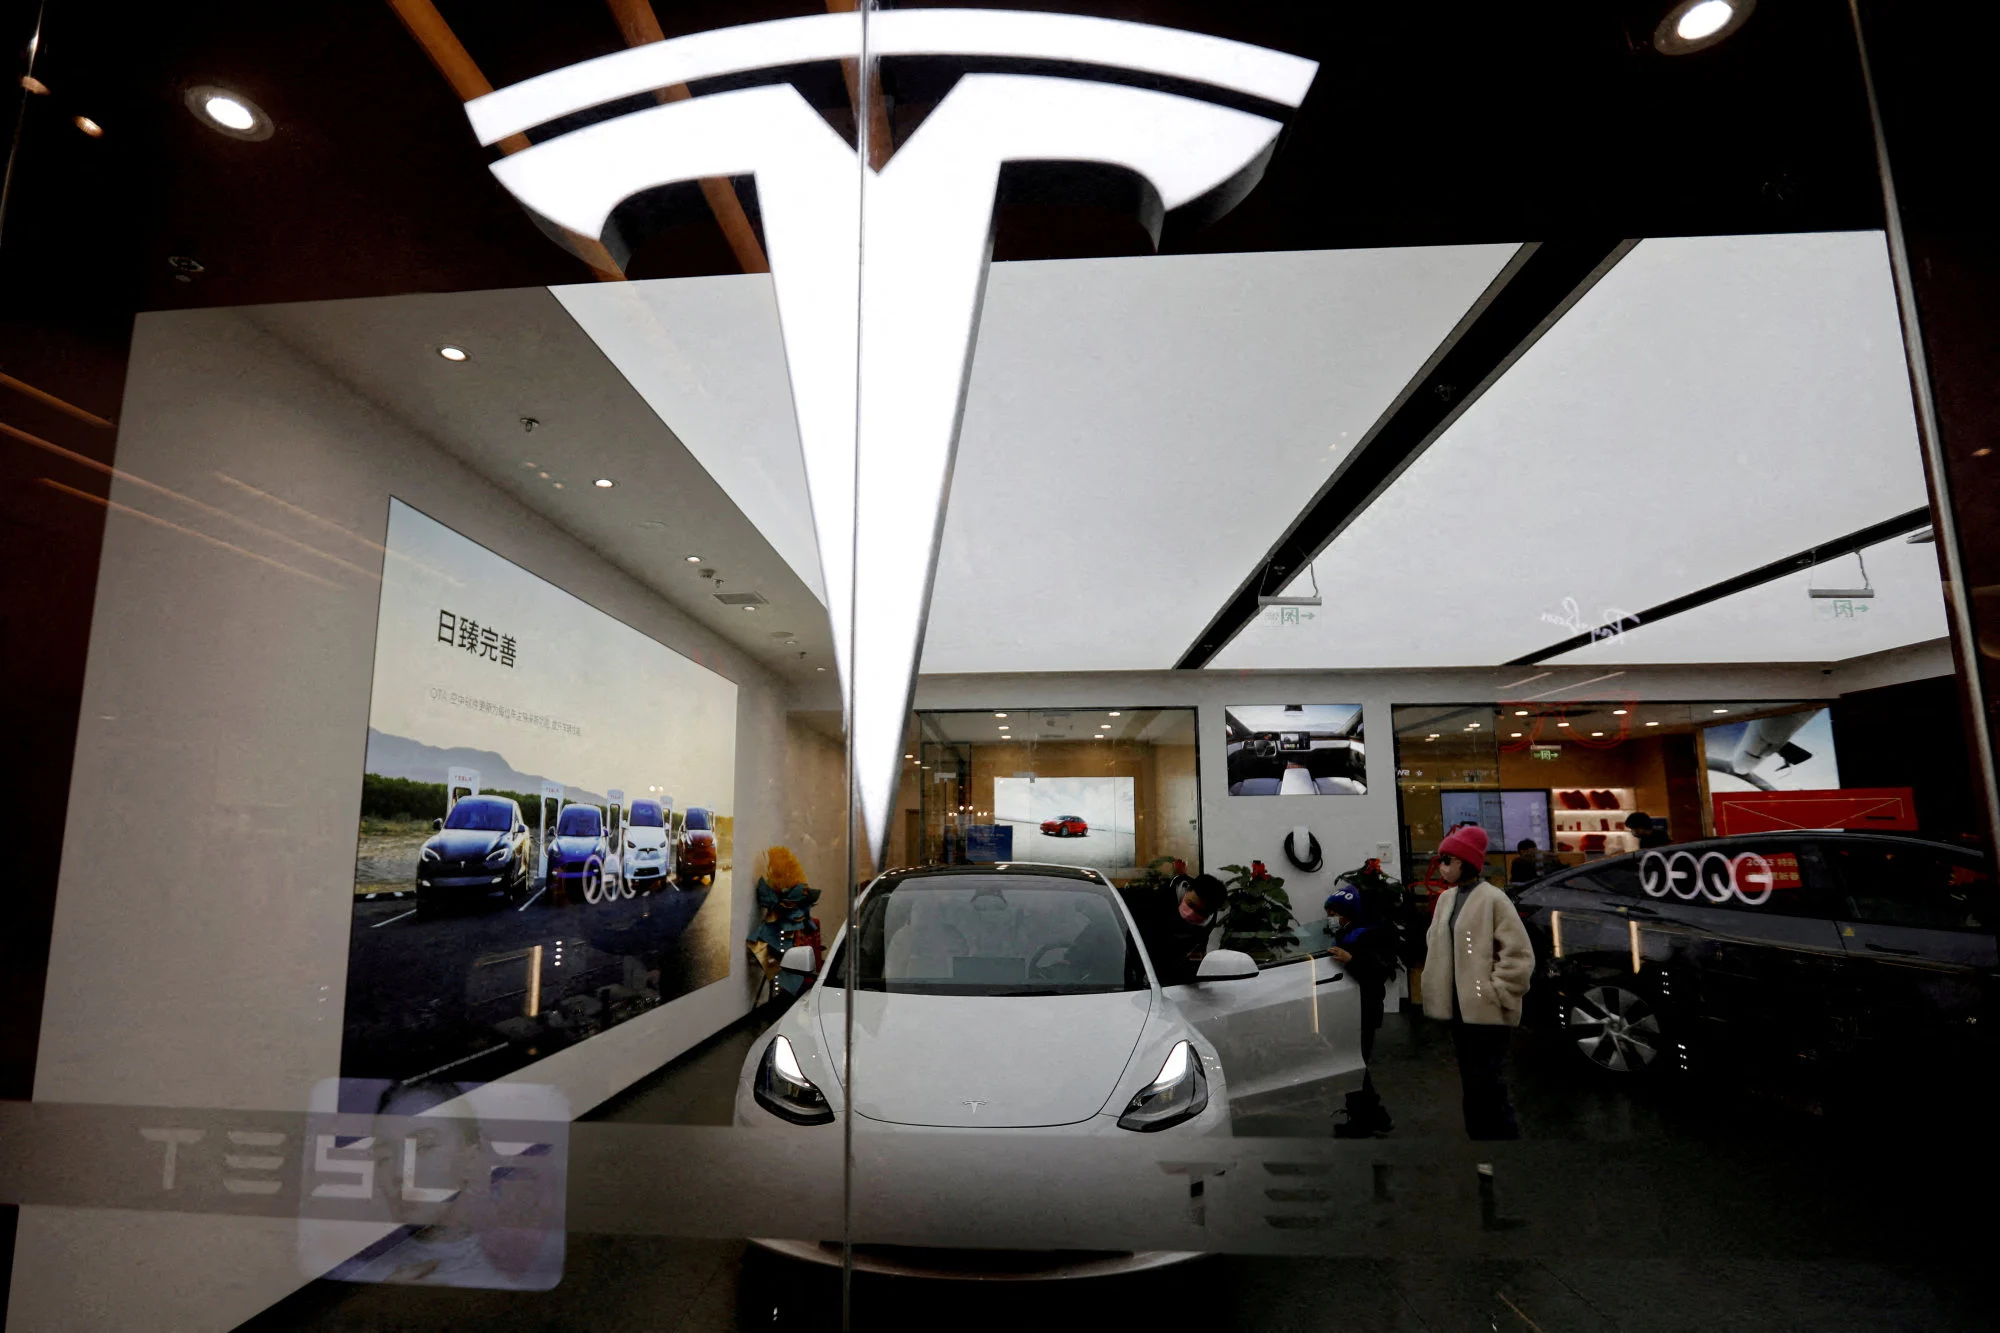 Premier Li's meeting with Musk highlights U.S.-China economic cooperation (Credits: Reuters)